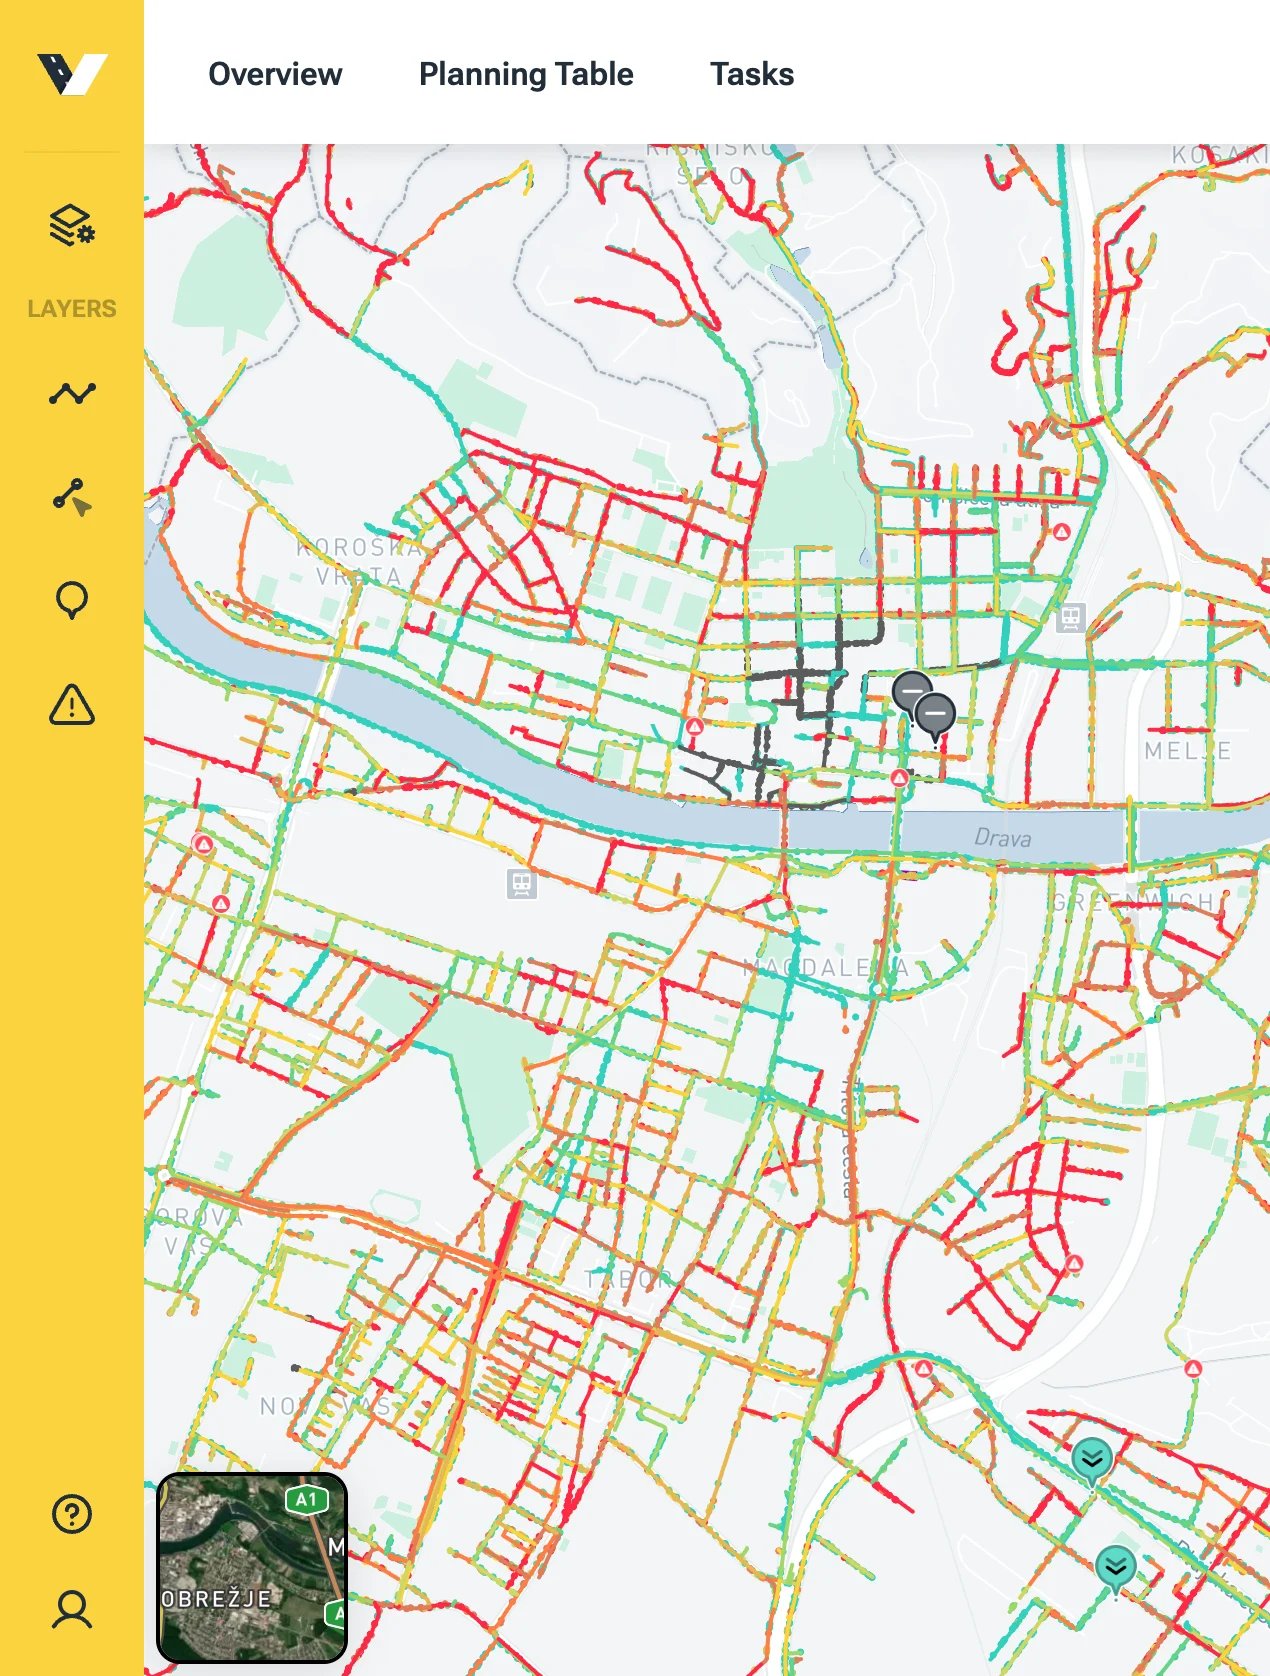 Screenshot of the map of Maribor from the vialytics web system